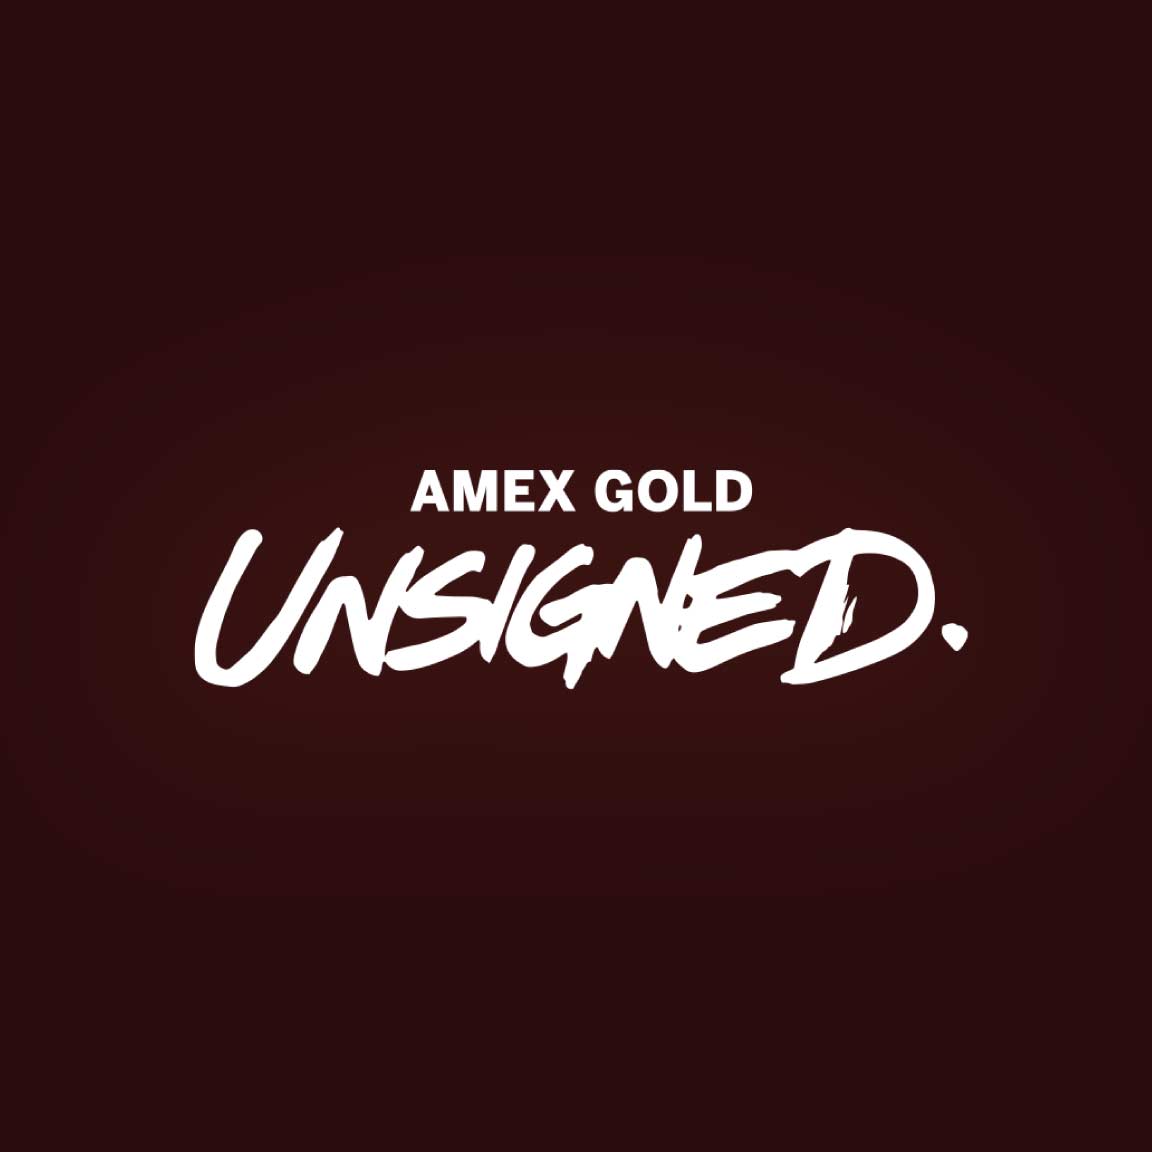 American Express Gold Unsigned